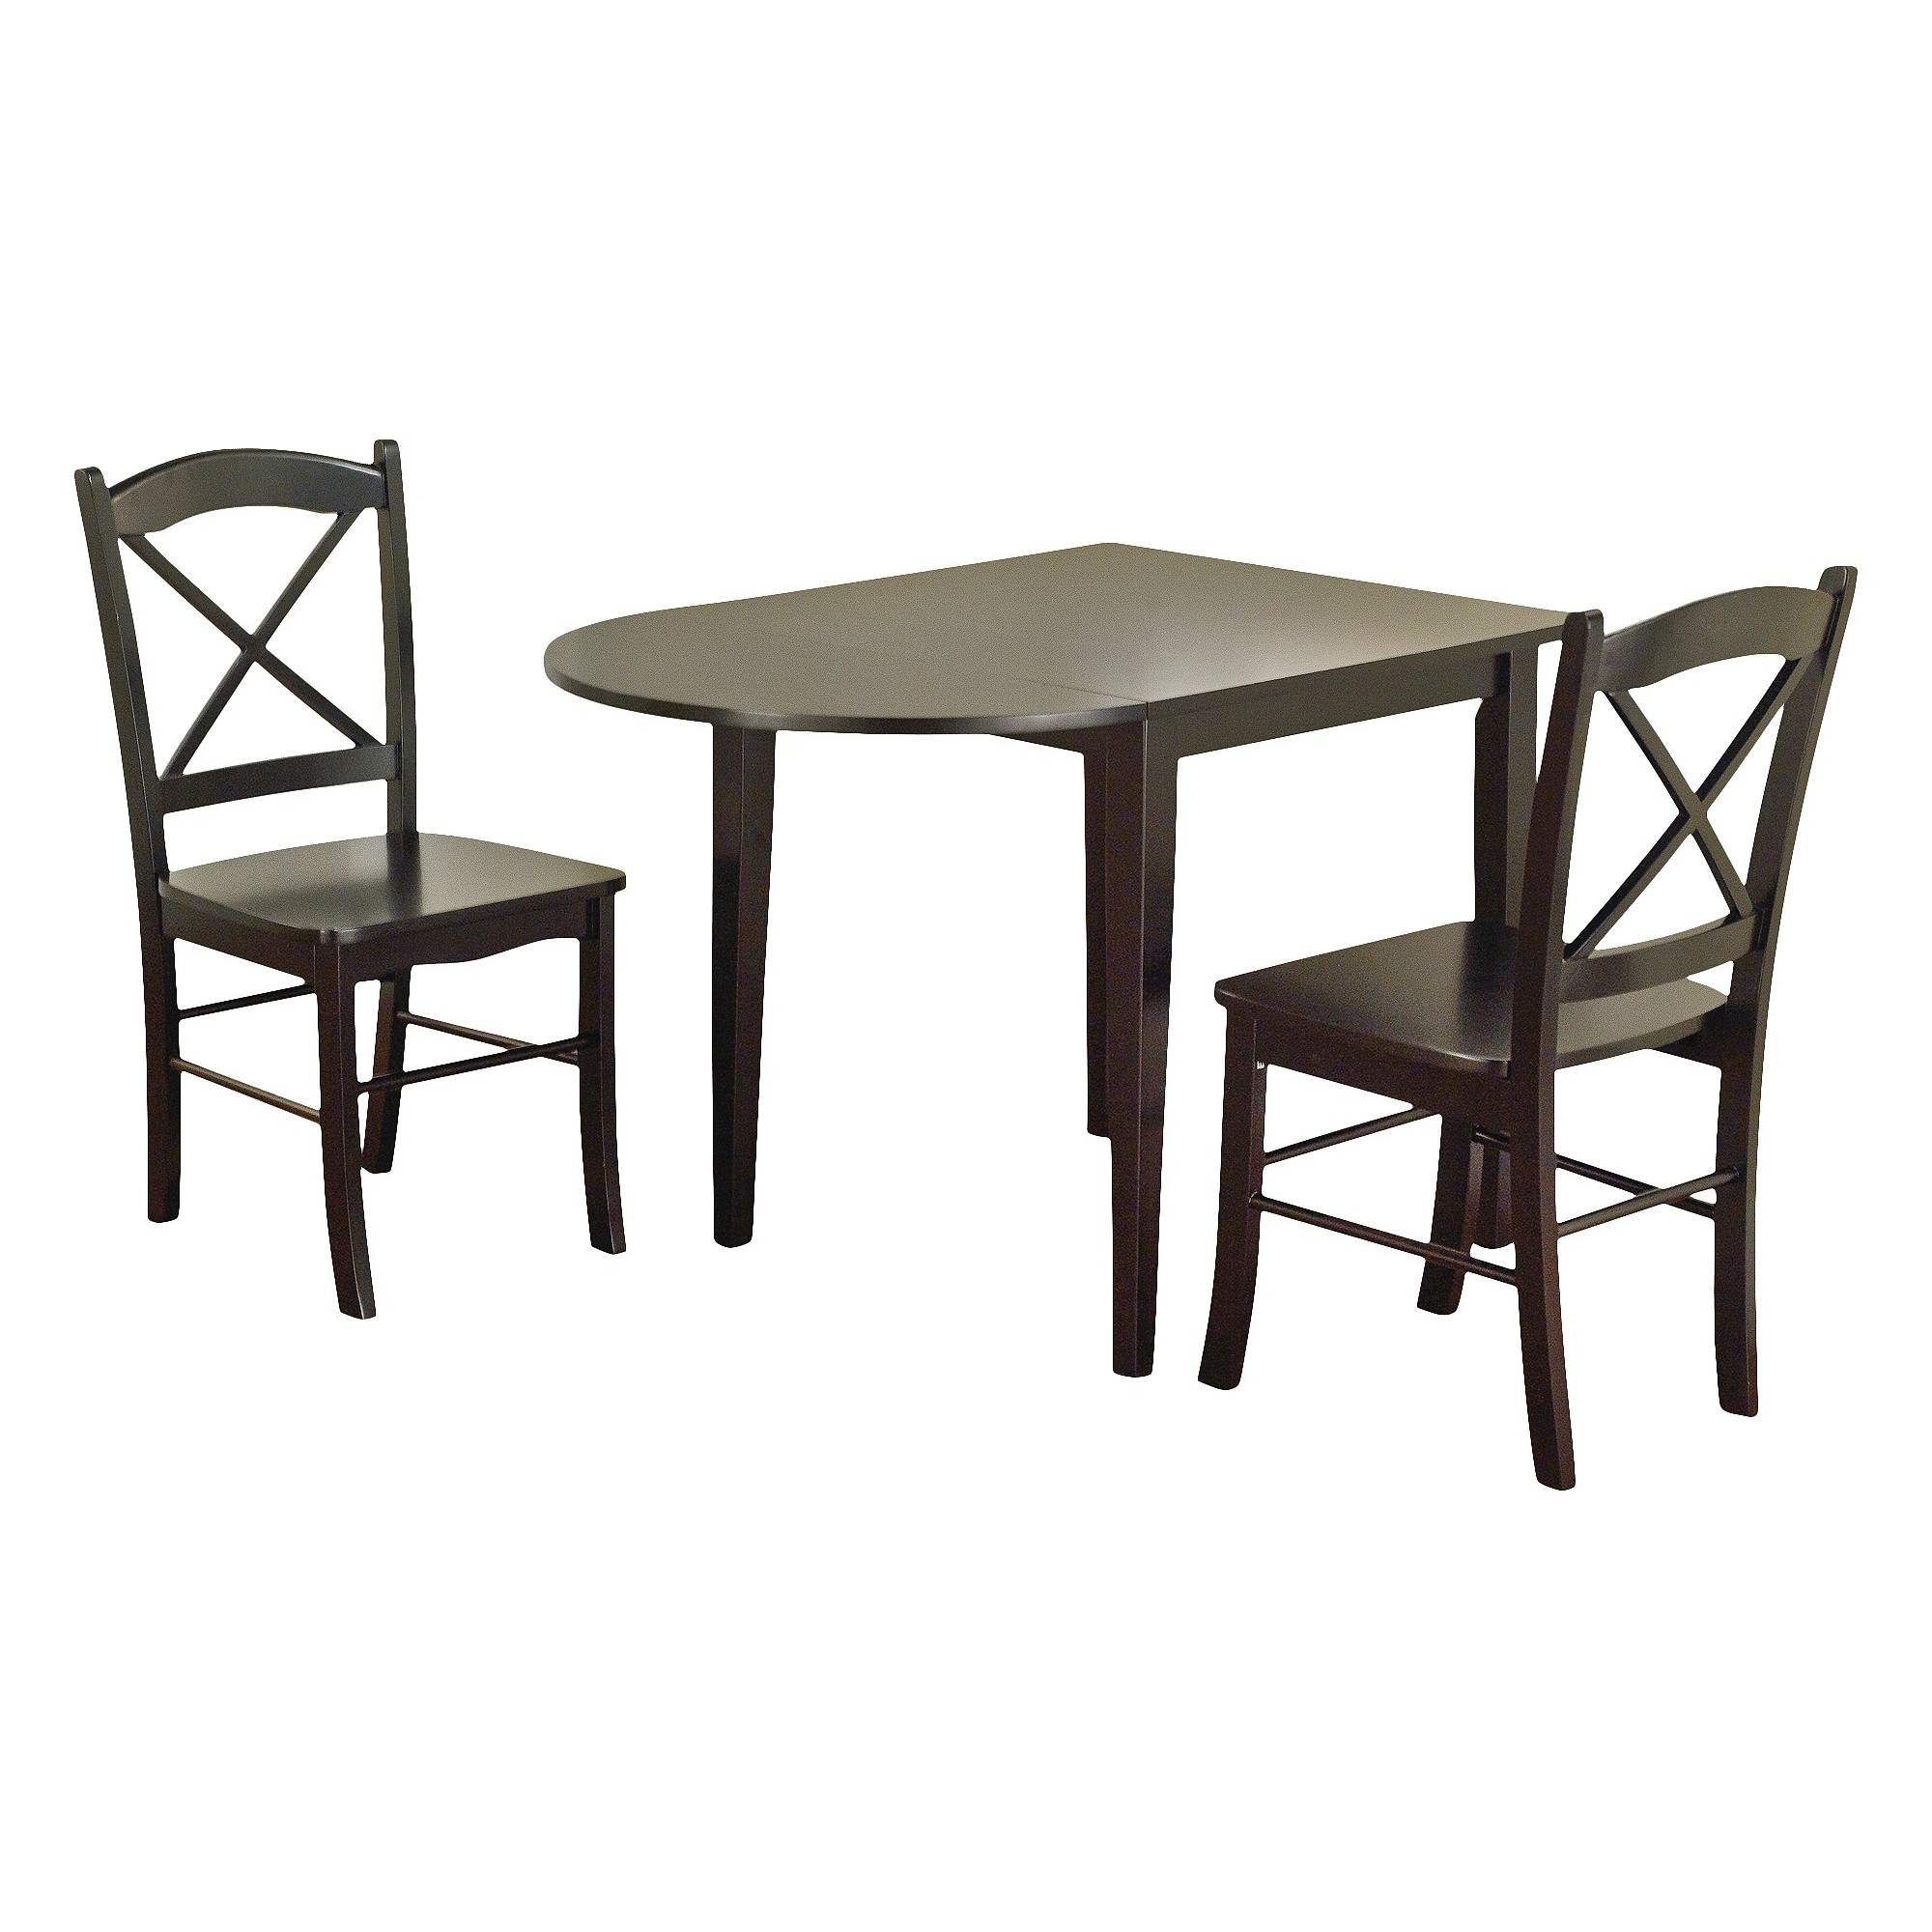 3 Piece Tiffany Dining Table Set Wood/Black - TMS